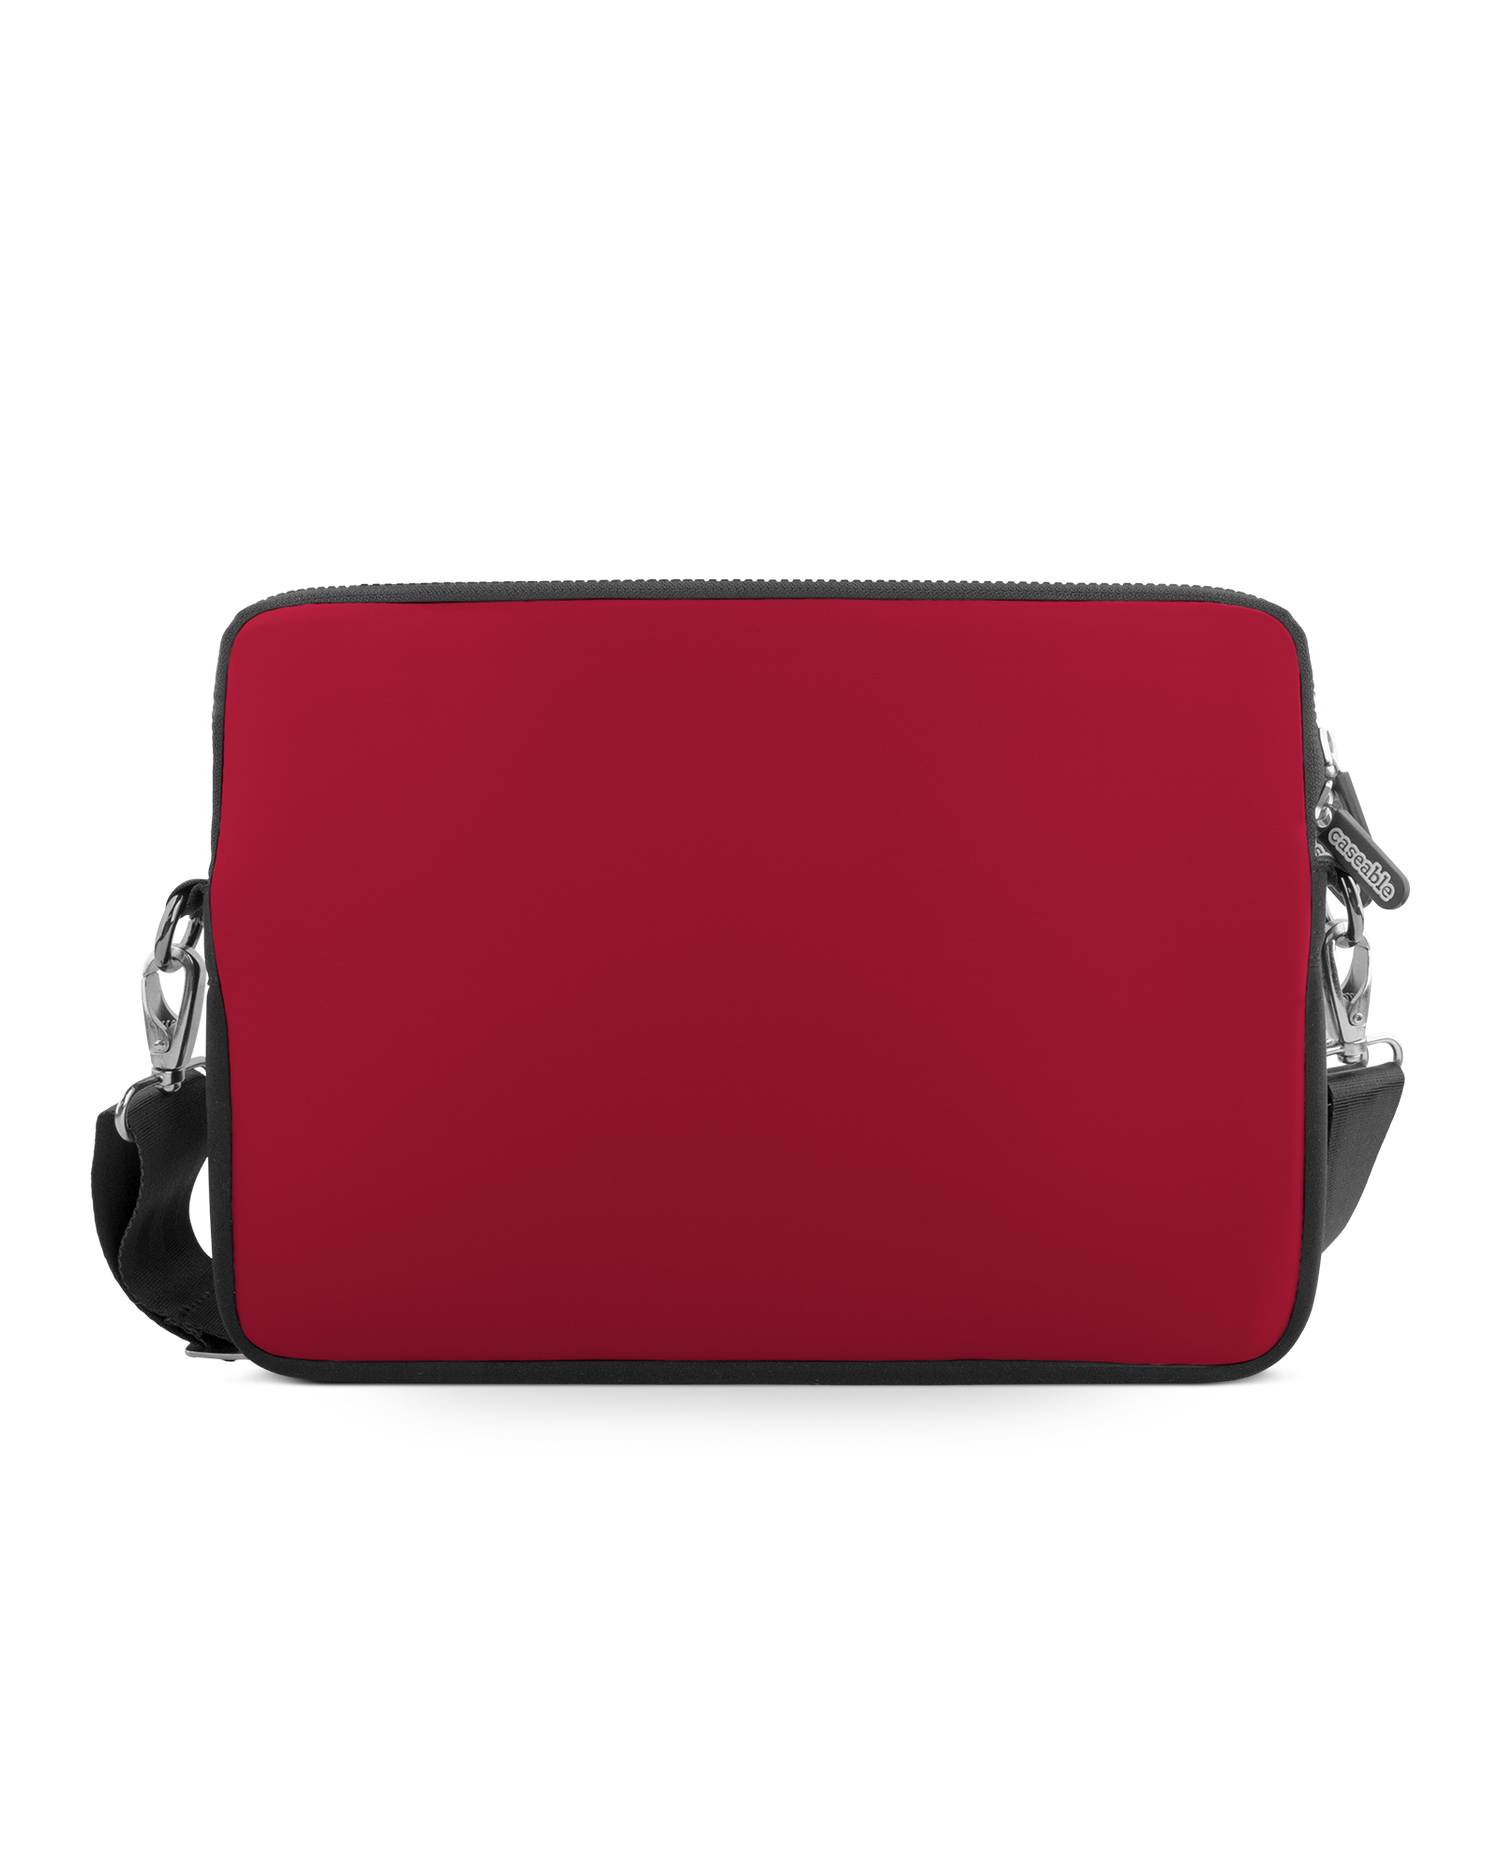 RED Premium Laptop Bag 13-14 inch: Front View